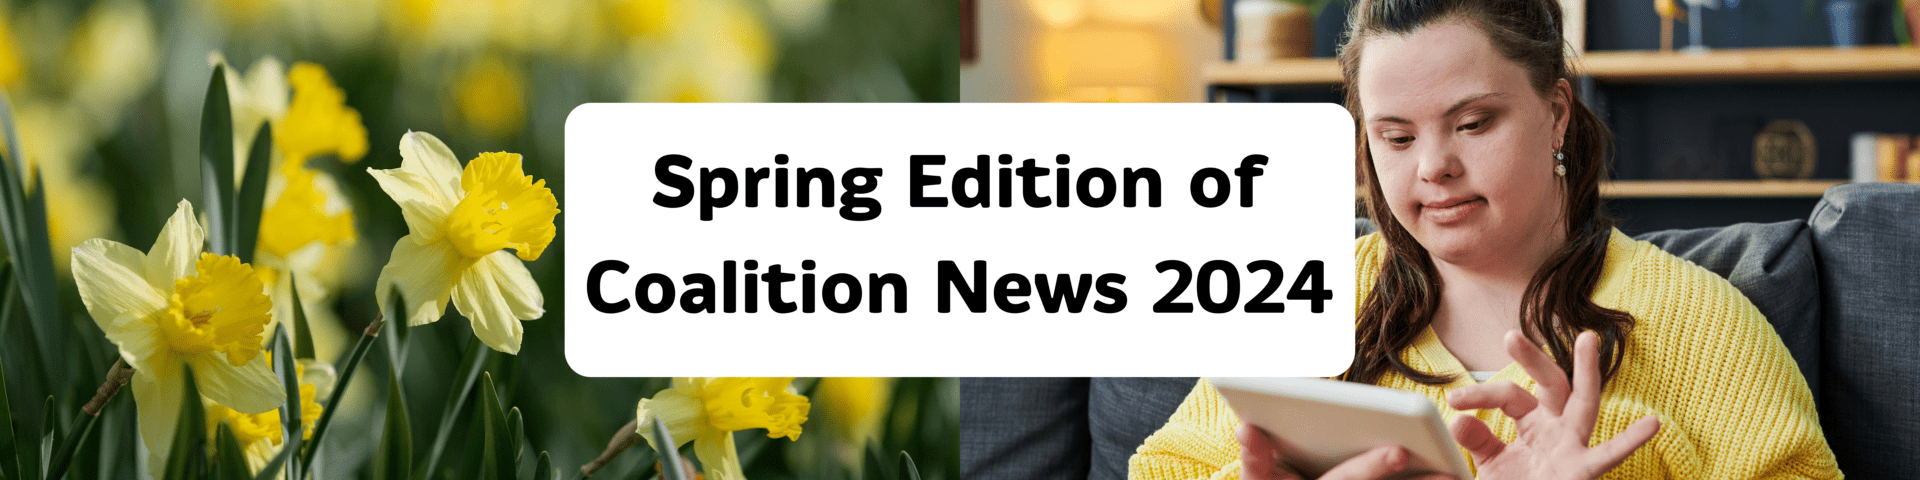 Banner with an image of daffodils and a woman looking at a digital tablet device. In the centre is a white banner with the following text: Spring Edition of Coalition News 2024.